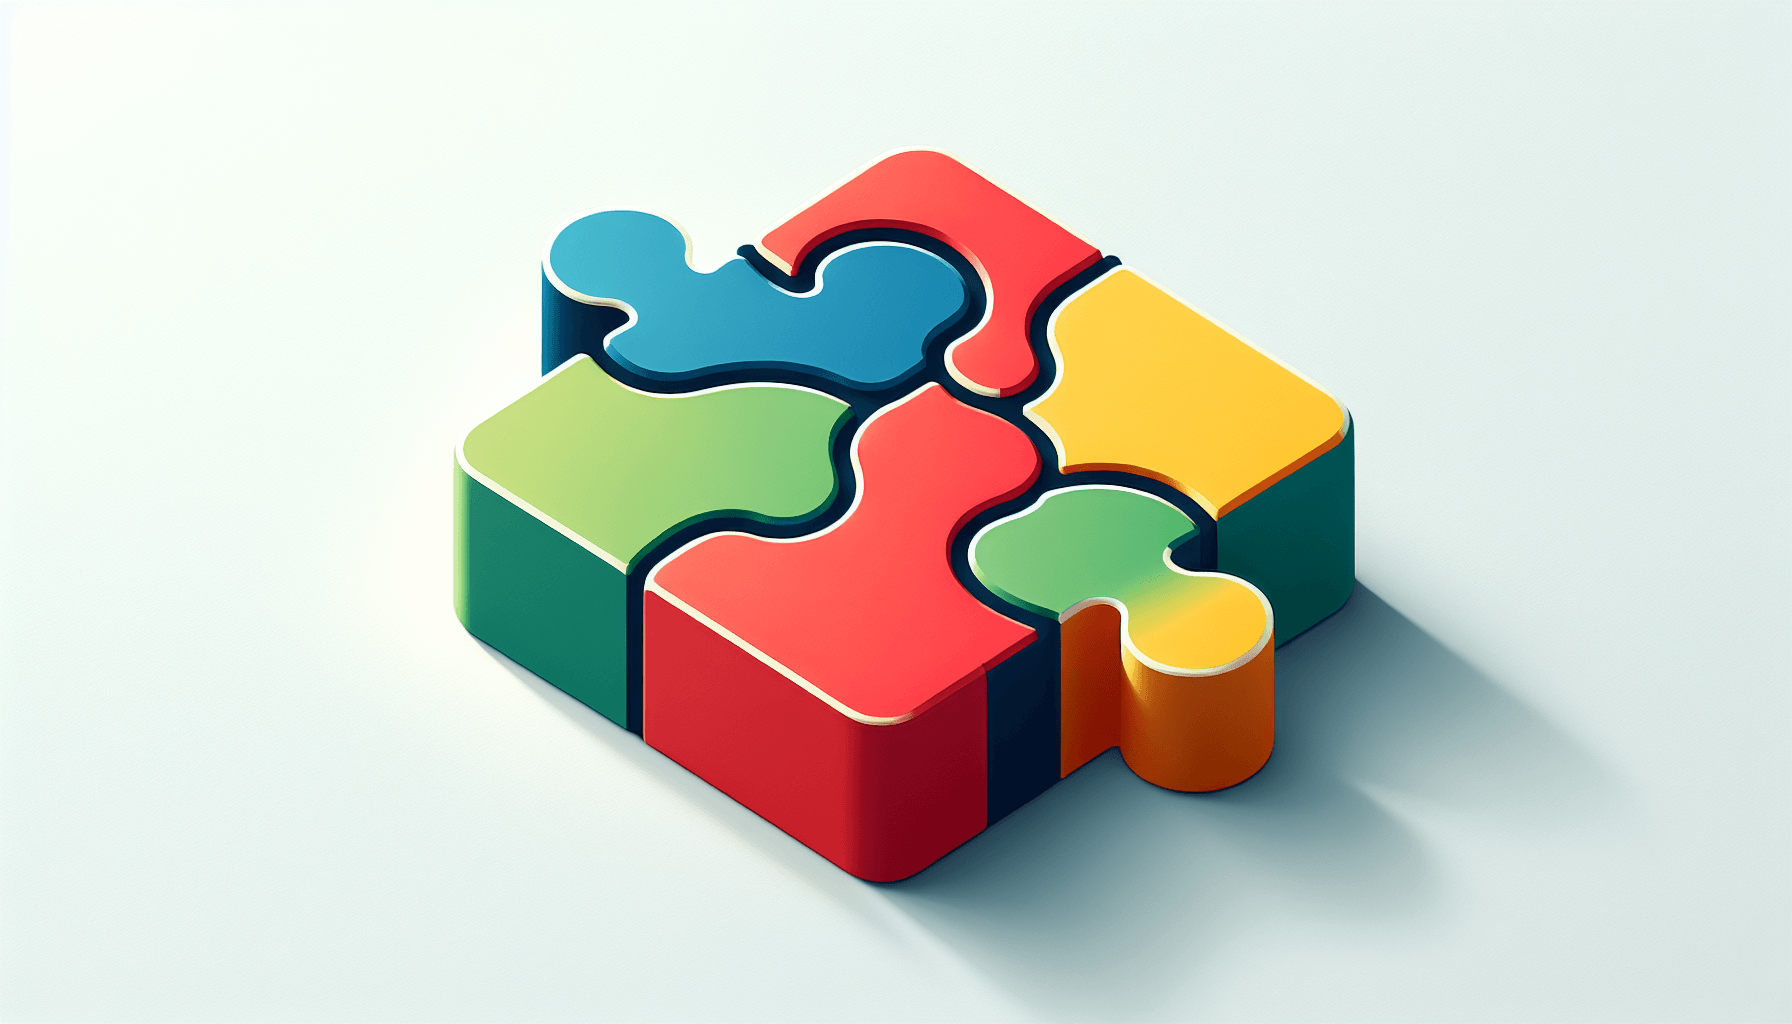 Puzzle piece in flat illustration style and white background, red #f47574, green #88c7a8, yellow #fcc44b, and blue #645bc8 colors.